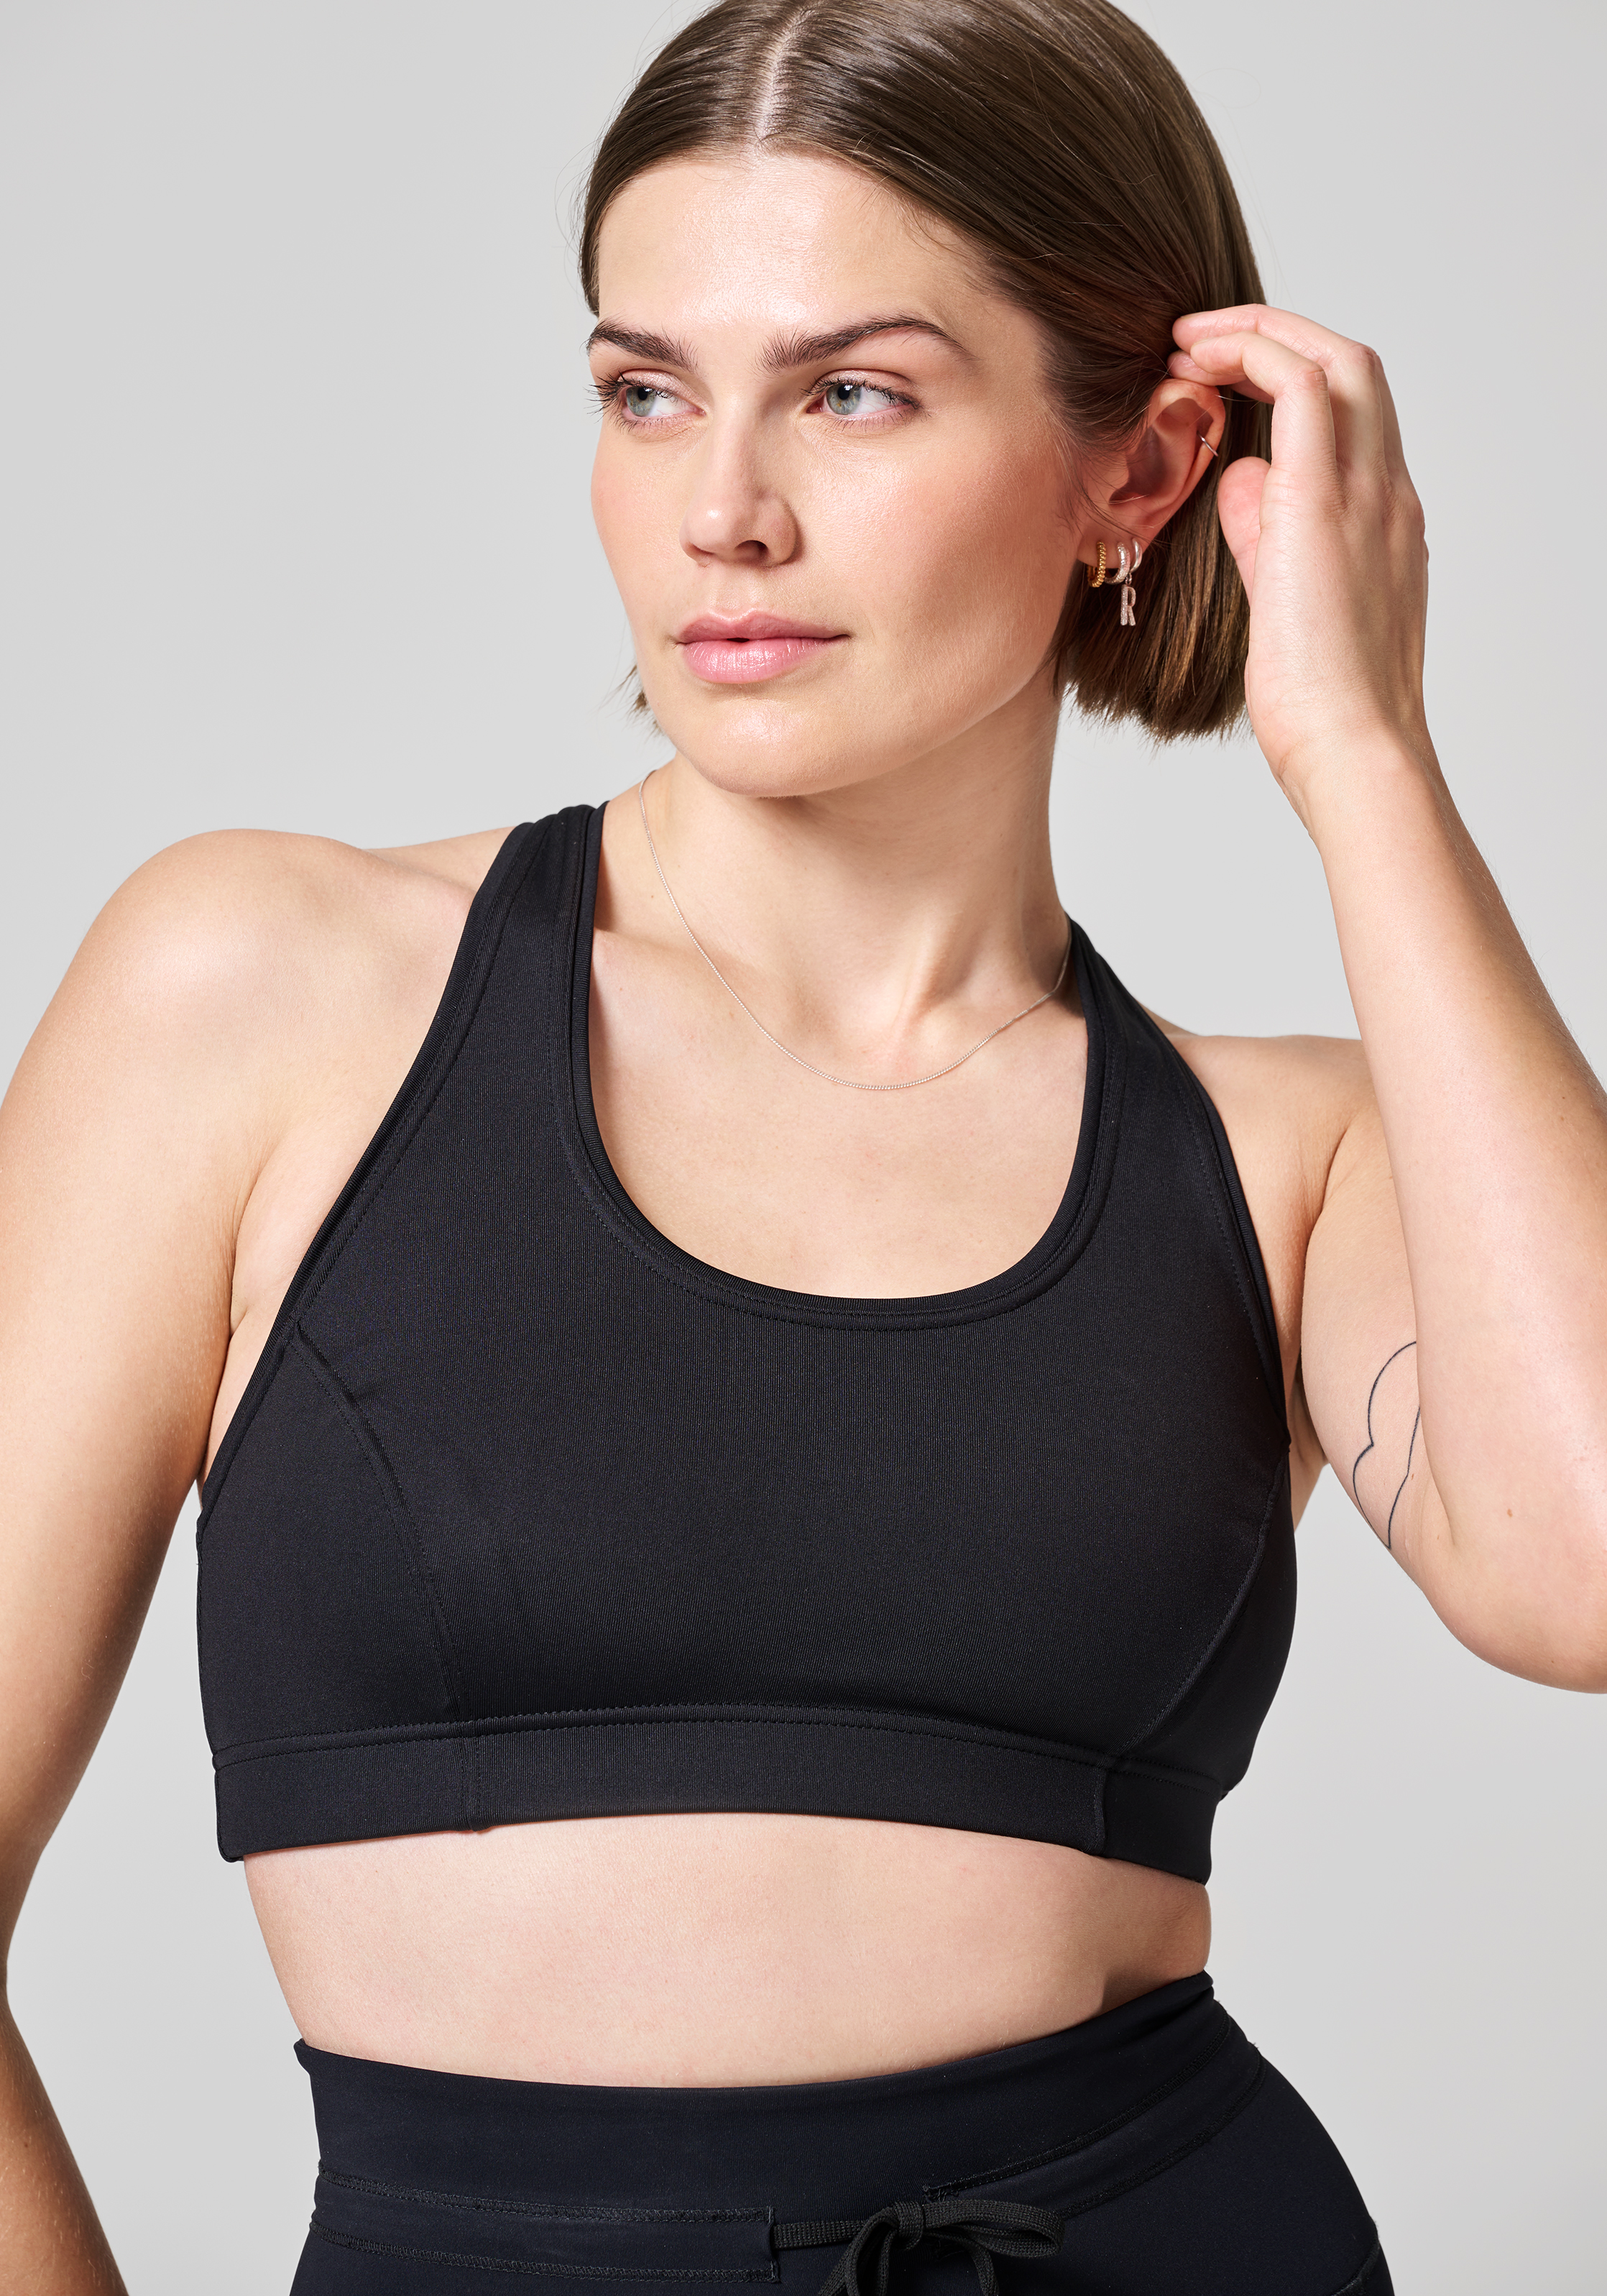 Appl Non-Padded Full Cup Sports Bra - sizes XS to XL - lots of 9pcs -  United Kingdom, New - The wholesale platform